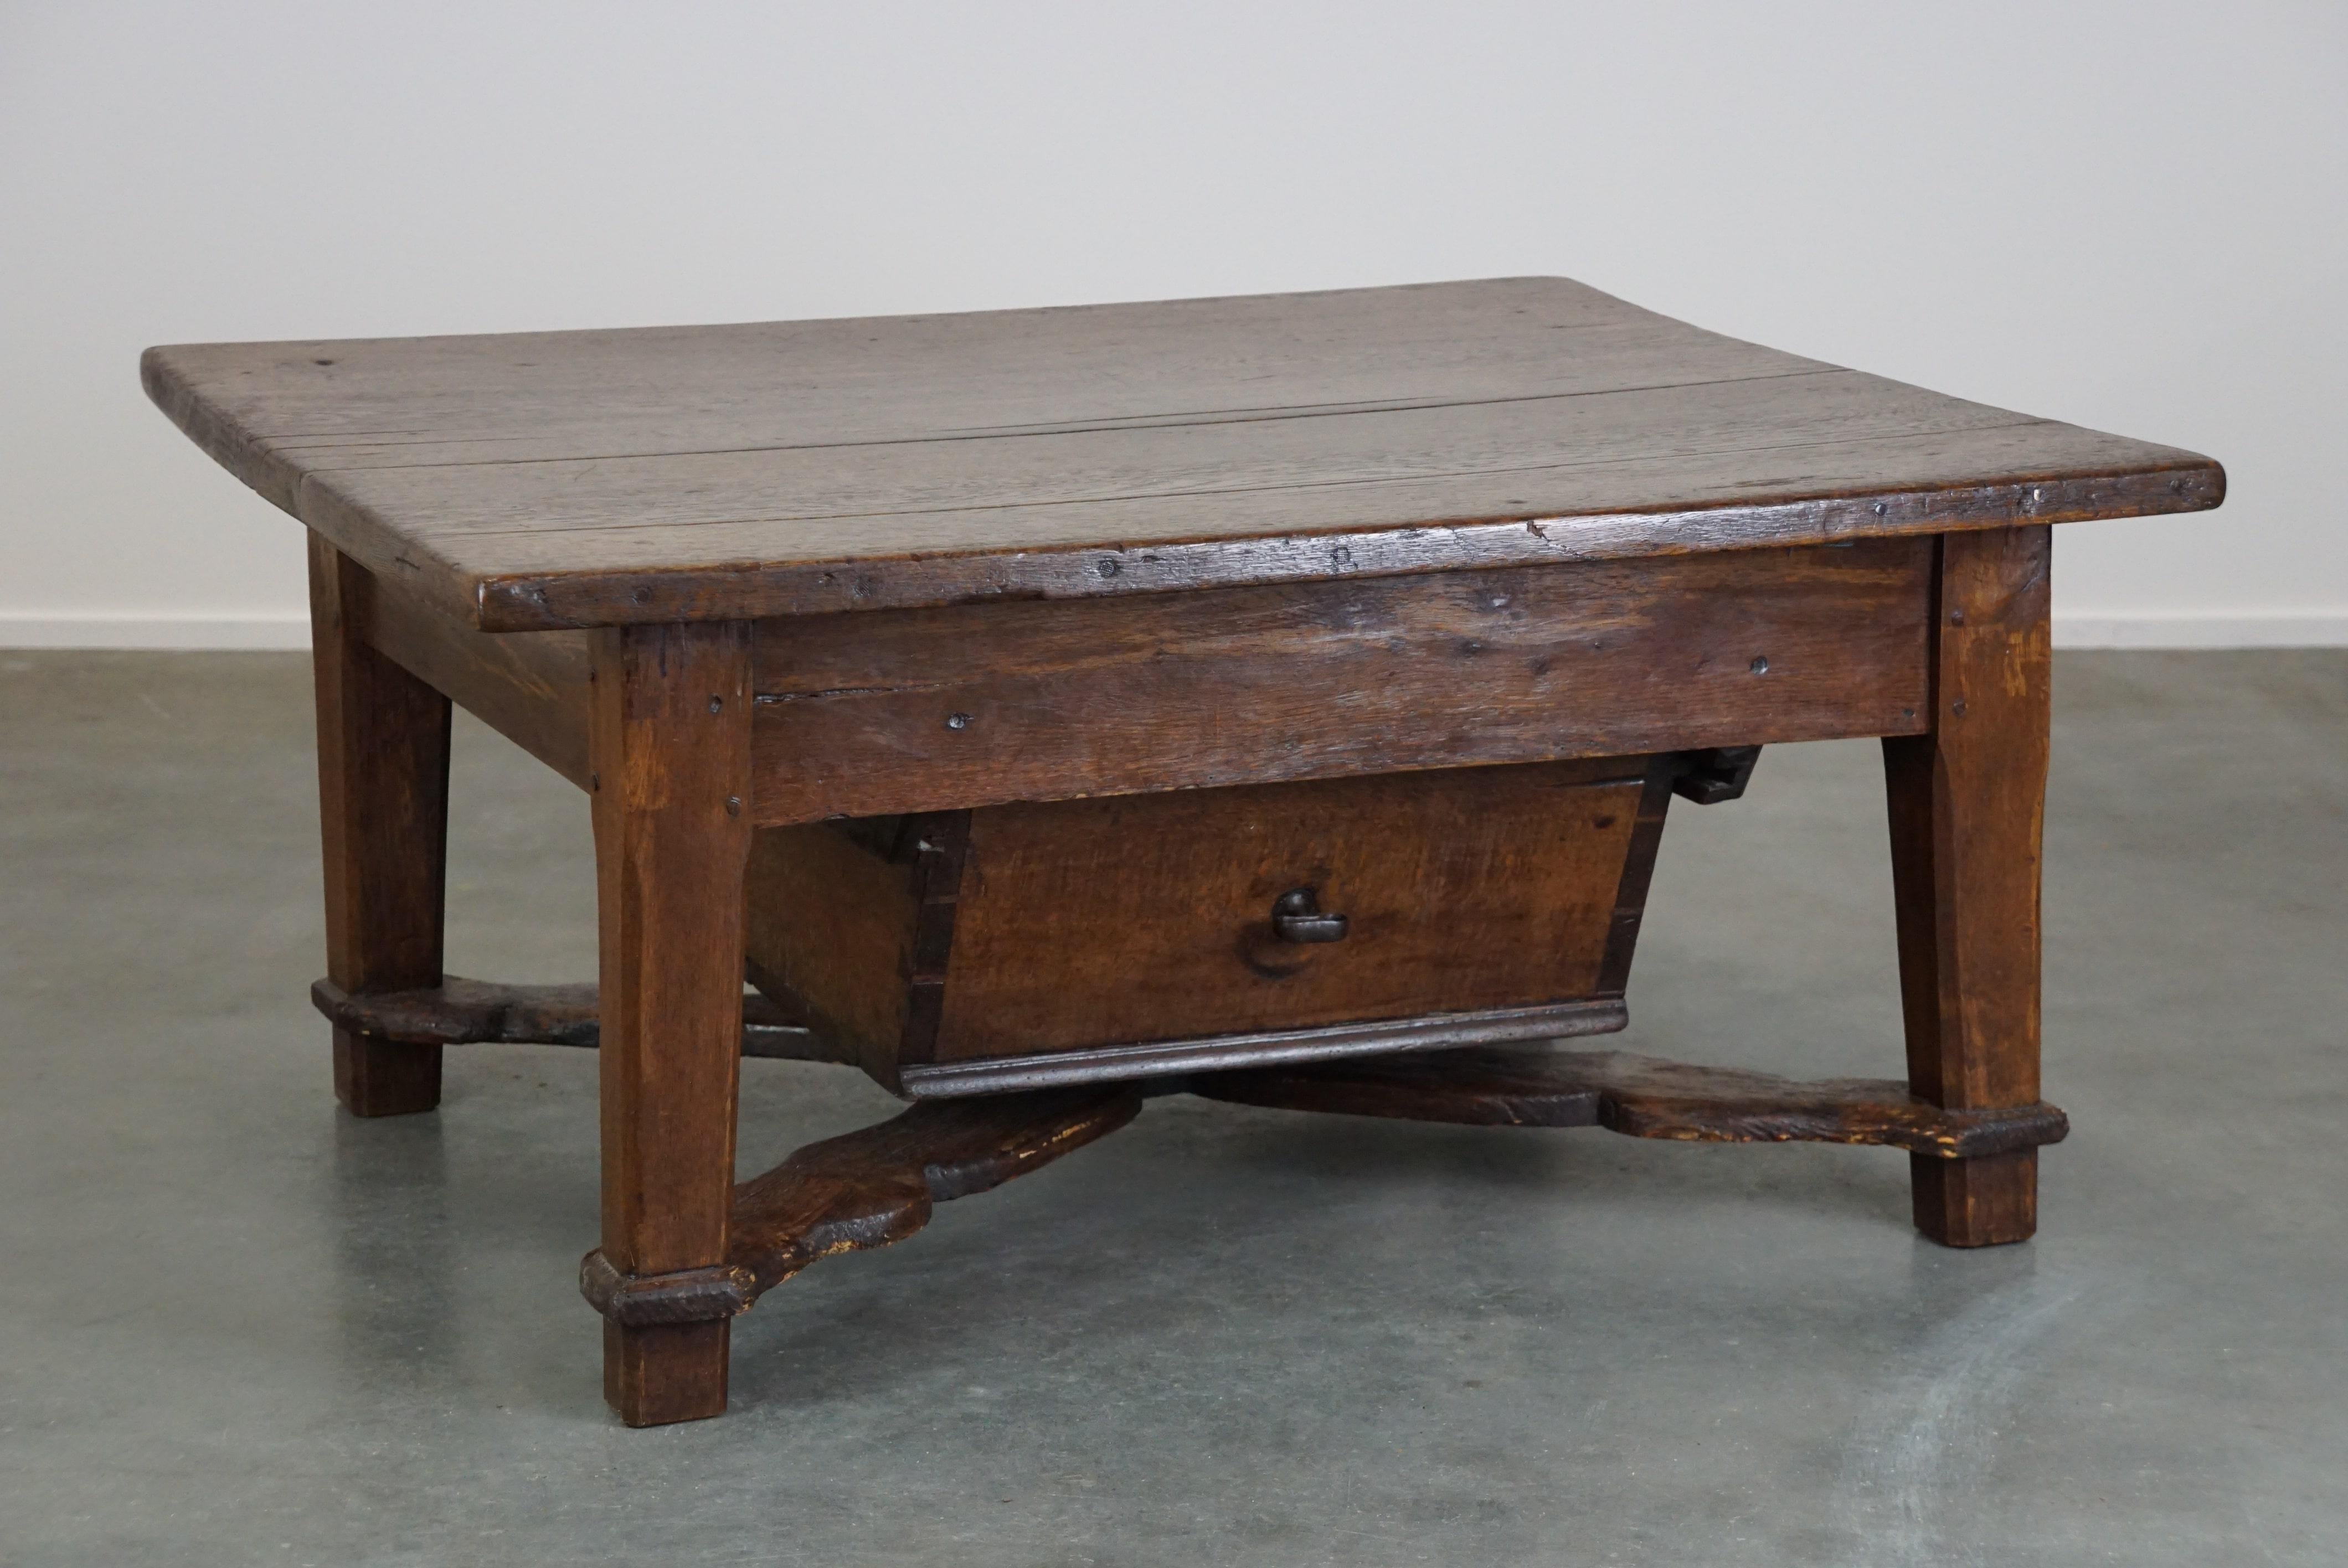 Offered: this very beautiful late 18th-century Spanish coffee table with a deep drawer and a beautiful patina.

This lovely and practical antique coffee table is a valuable addition to almost any interior. With its beautiful appearance and spacious